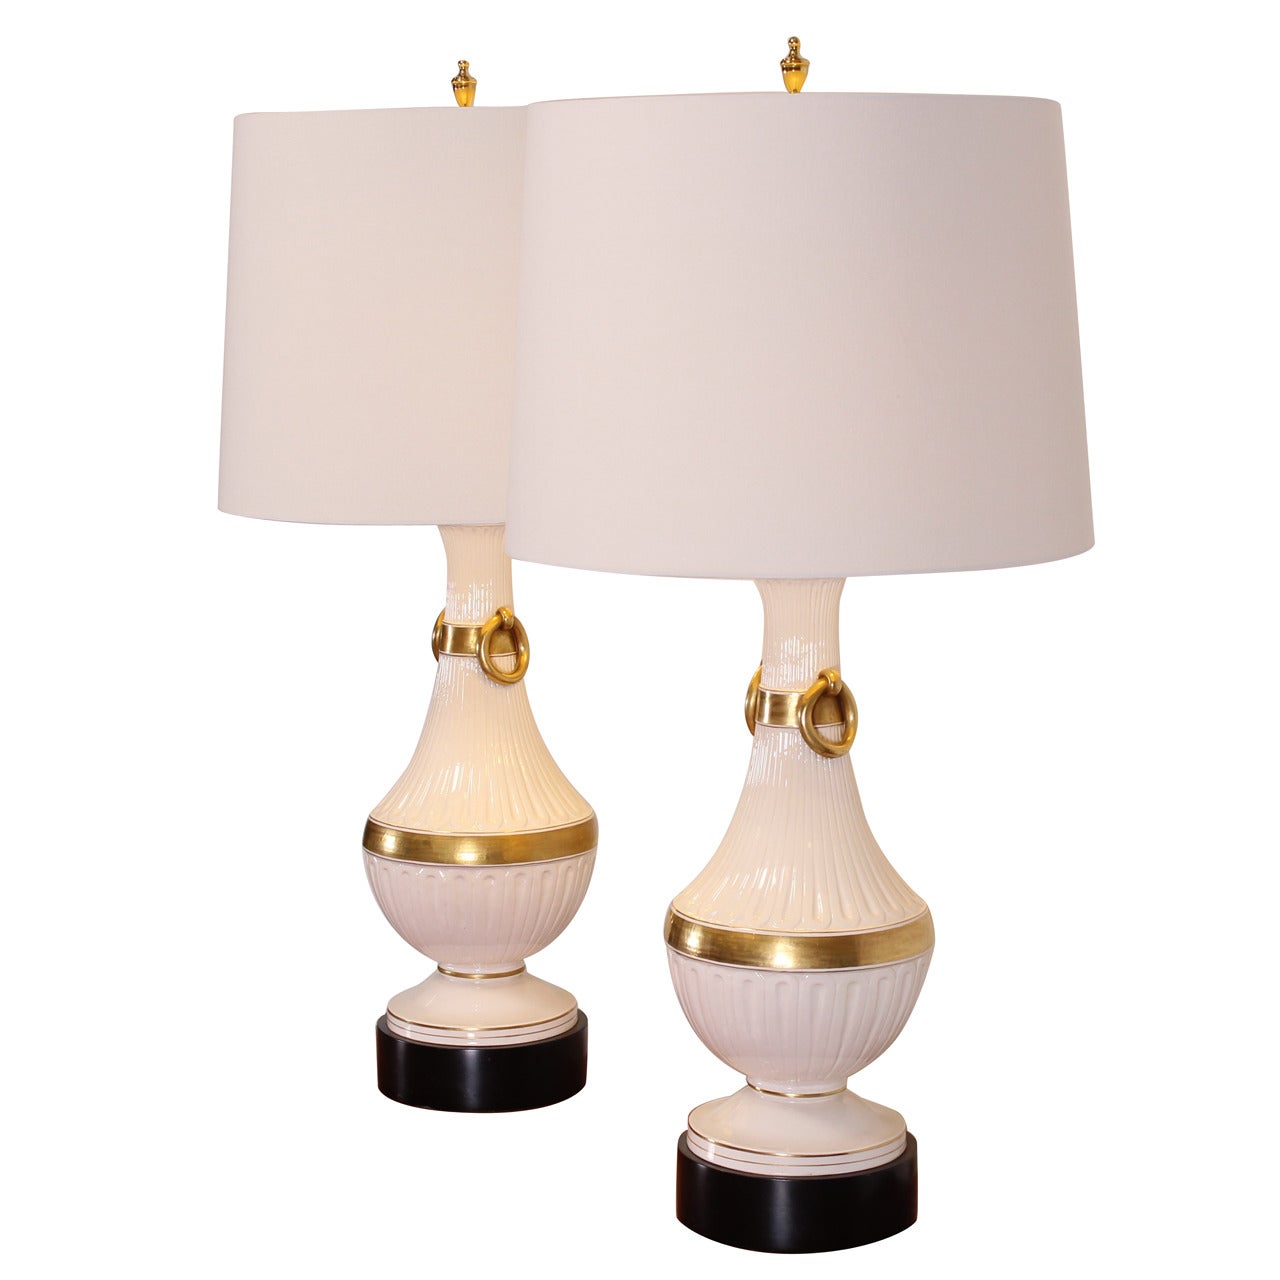 Hollywood Regency Chapman Style Classical Italian Pottery Lamps, 1960